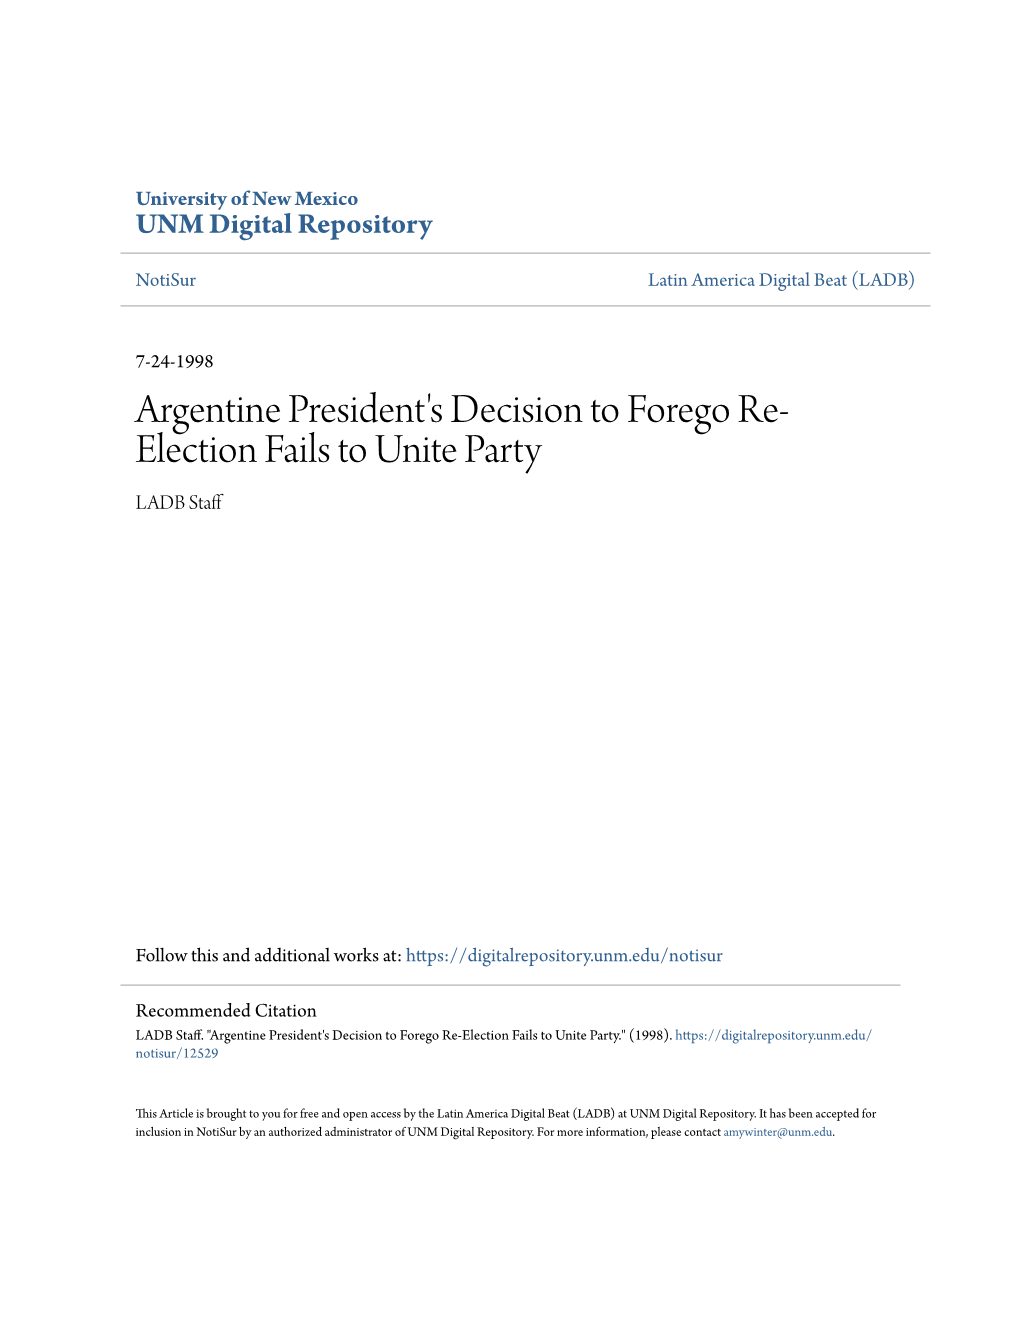 Argentine President's Decision to Forego Re-Election Fails to Unite Party." (1998)